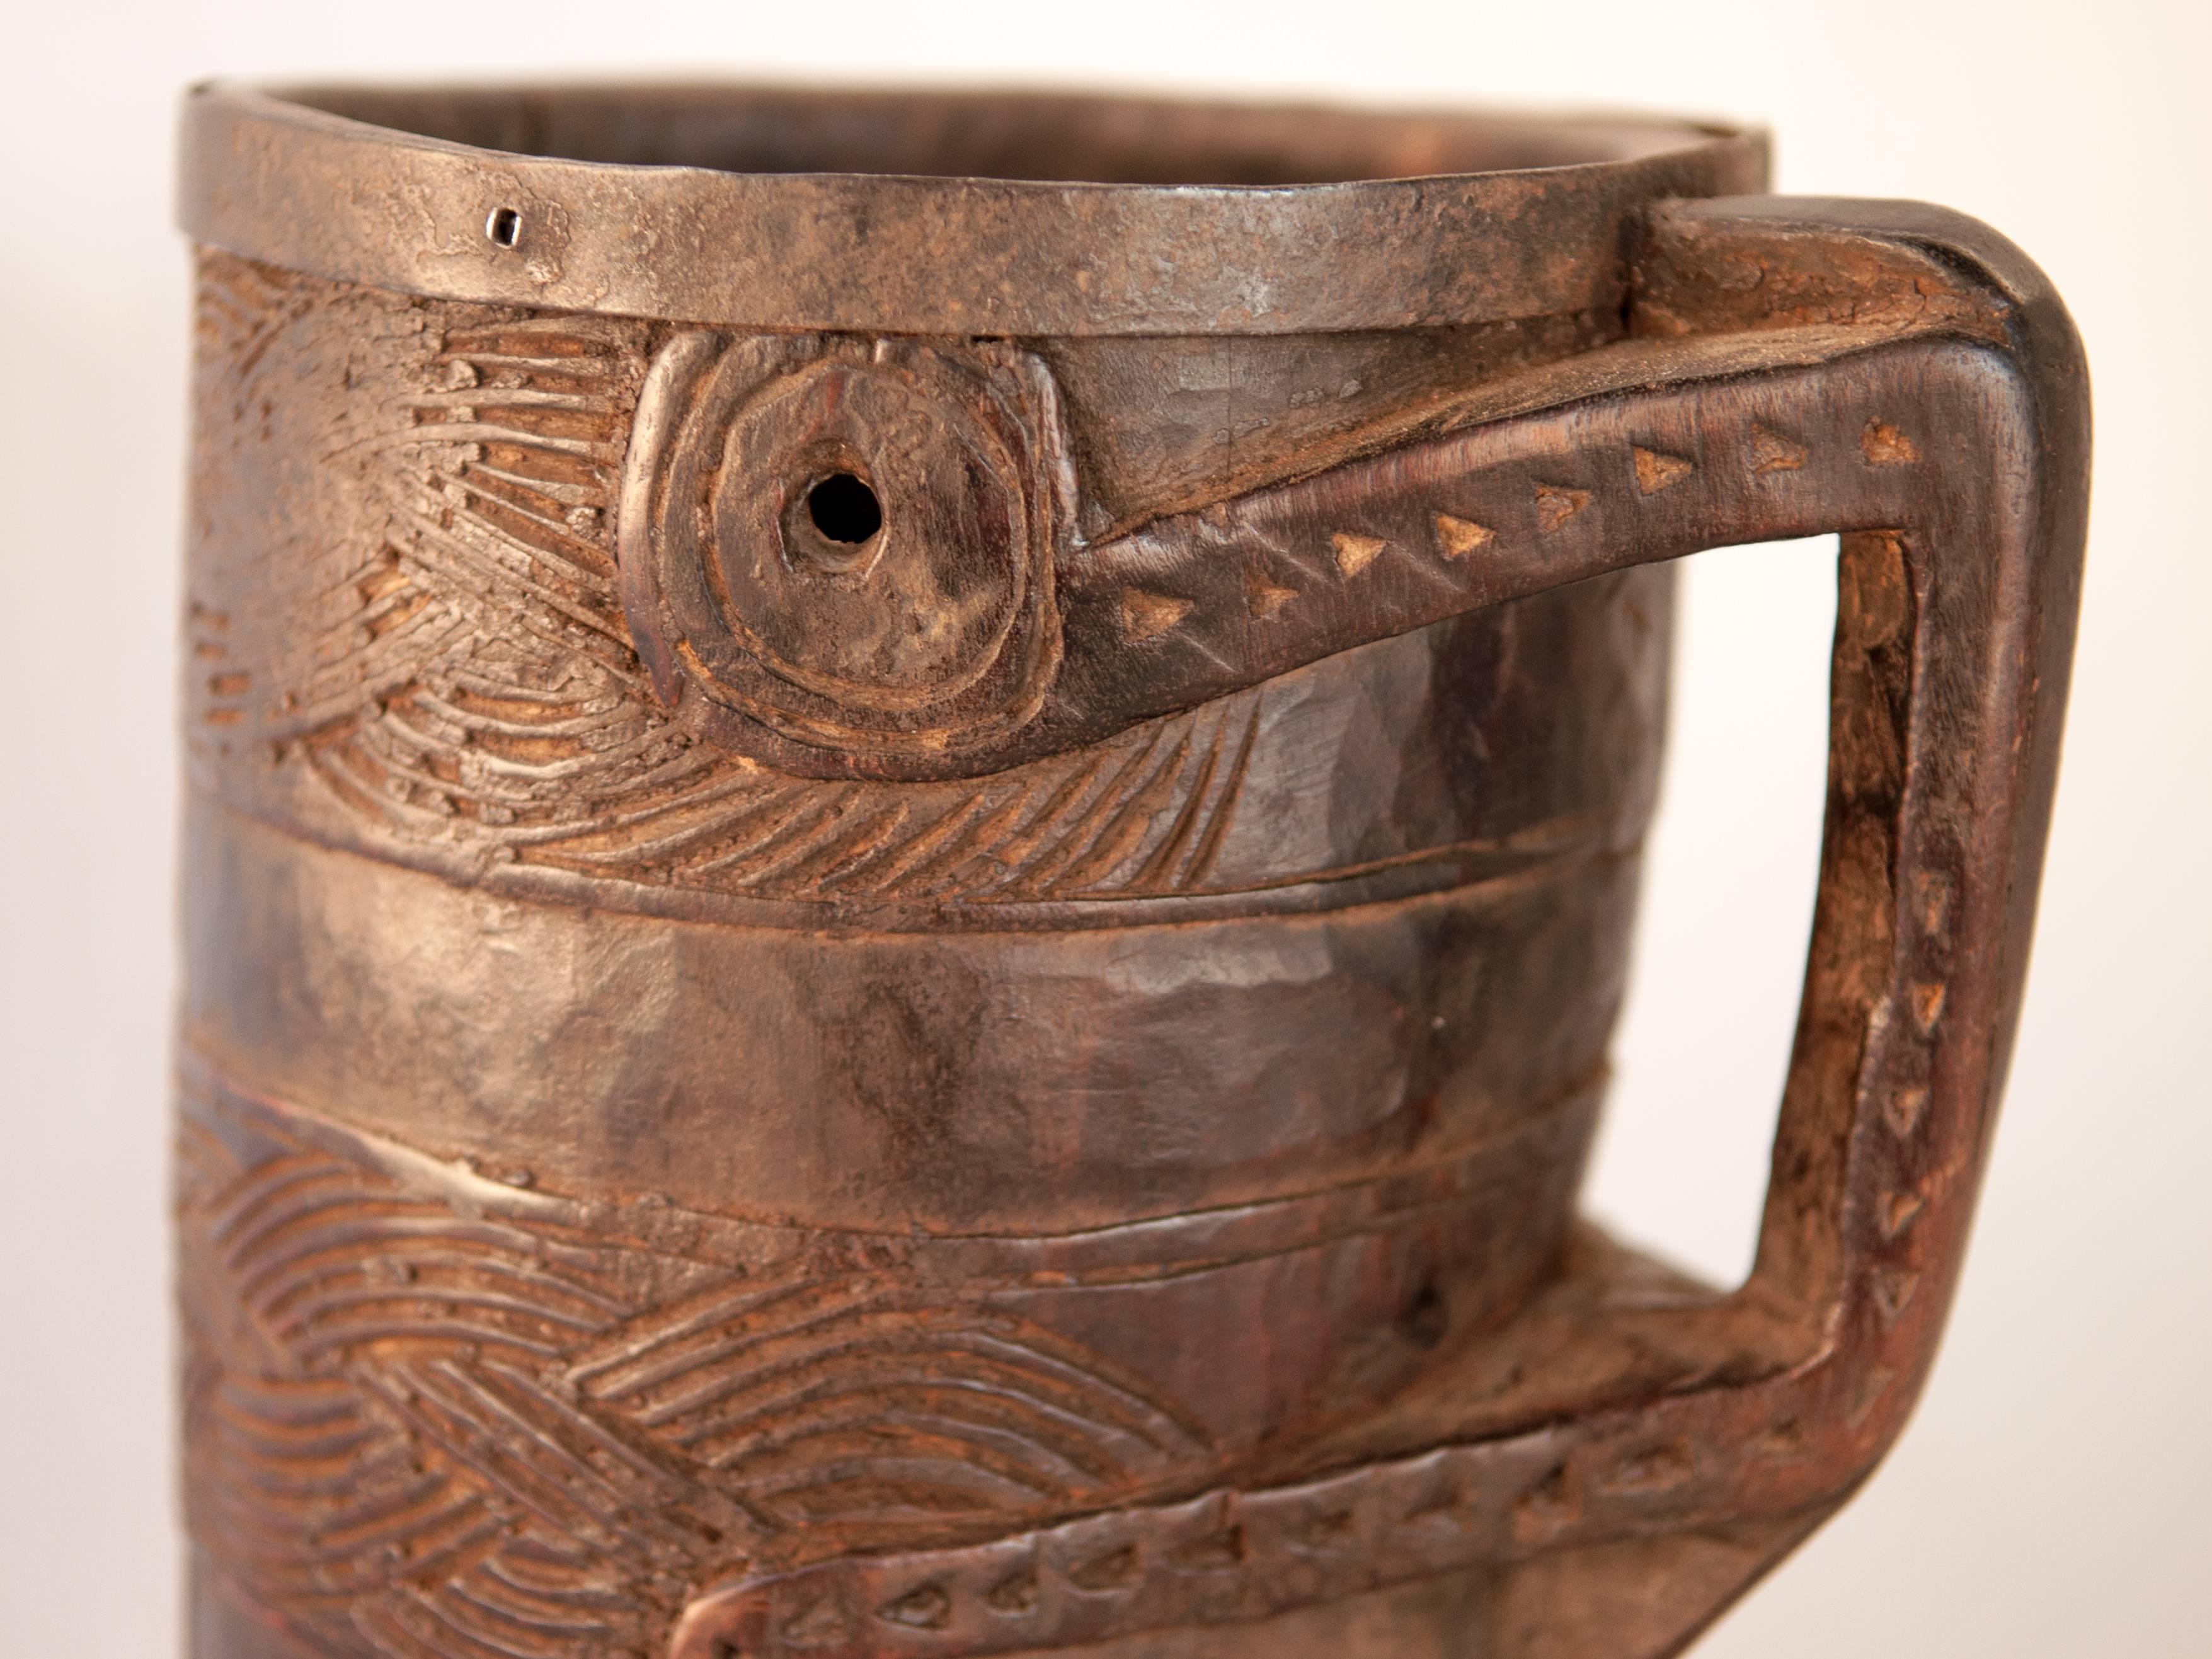 Nepalese Wooden Carved Milk Pot with Stylized Monkey Motif. Late 20th Century. West Nepal